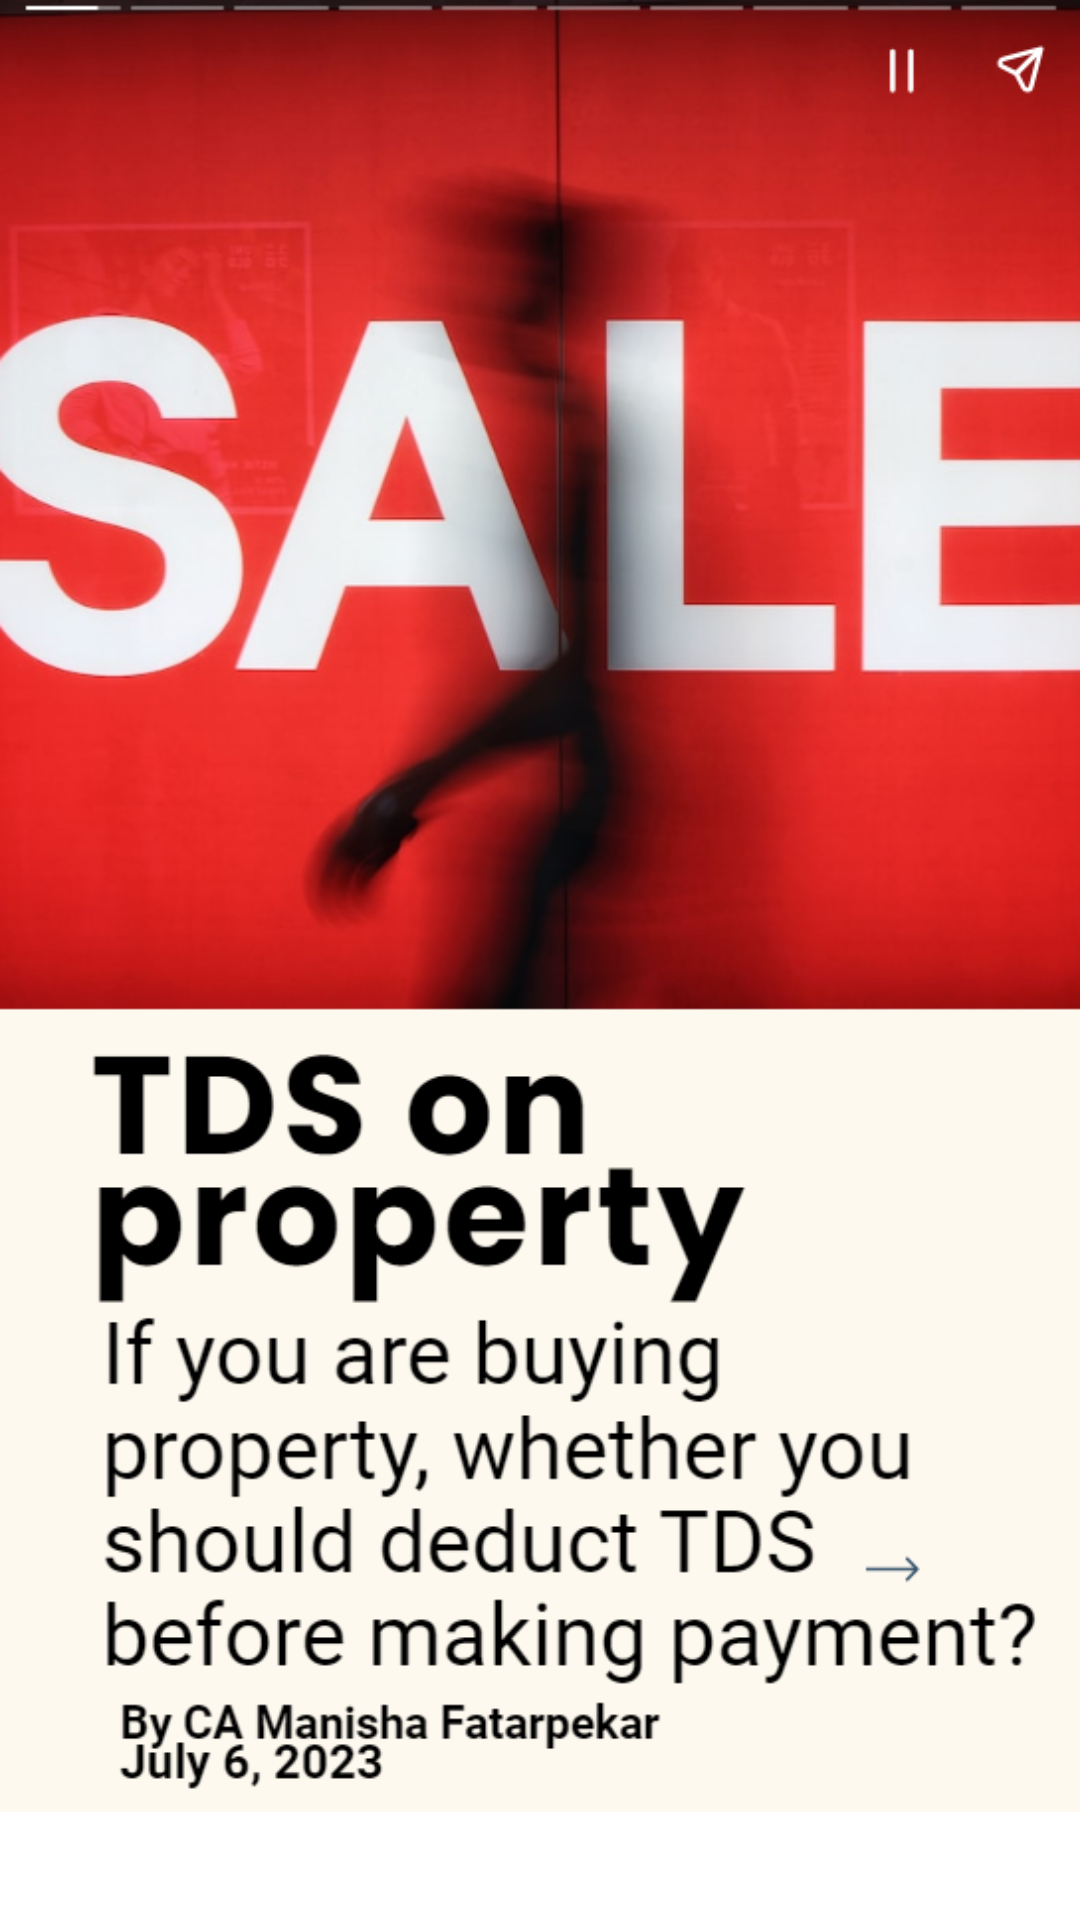 No need to deduct TDS, while buying property if…